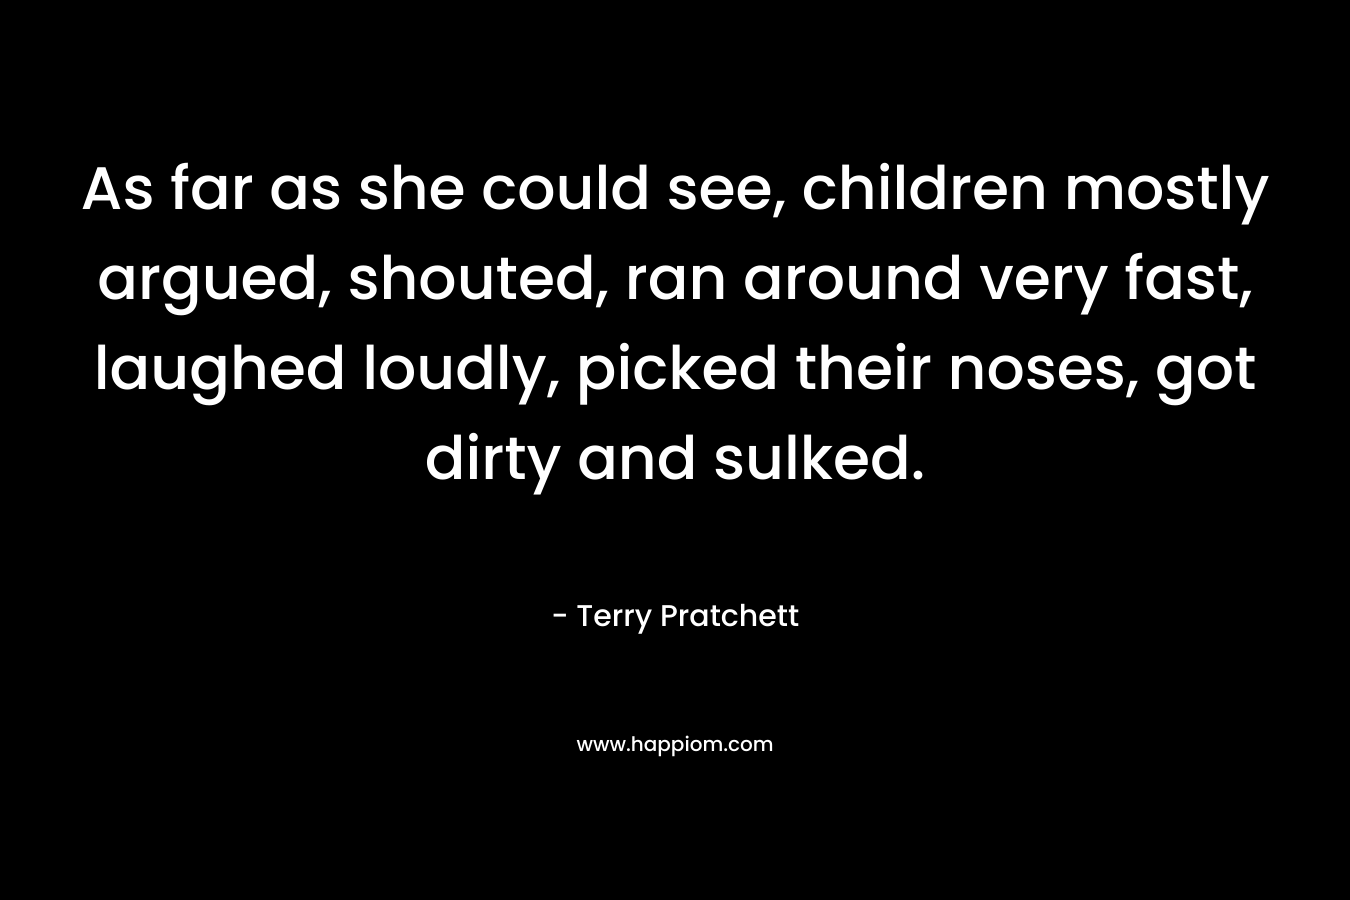 As far as she could see, children mostly argued, shouted, ran around very fast, laughed loudly, picked their noses, got dirty and sulked. – Terry Pratchett